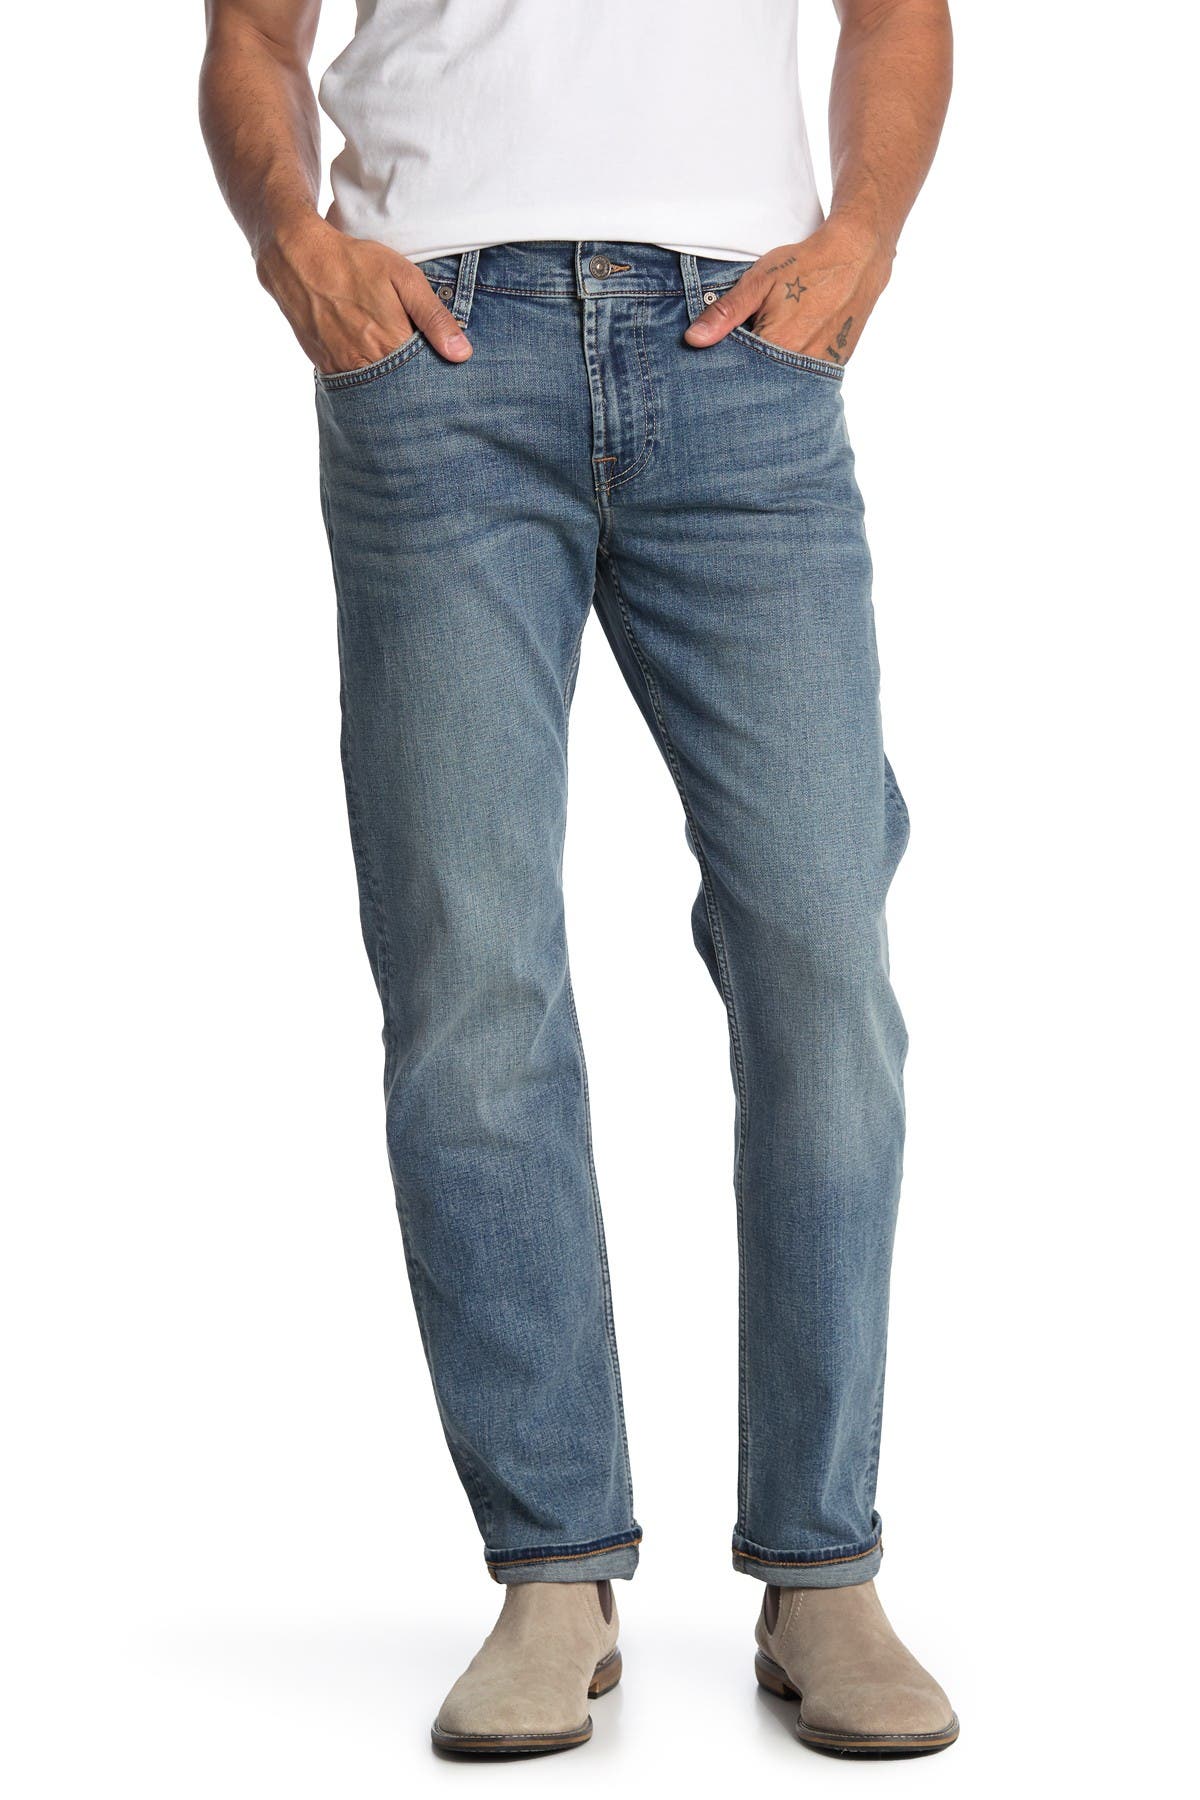 seven mankind jeans sale